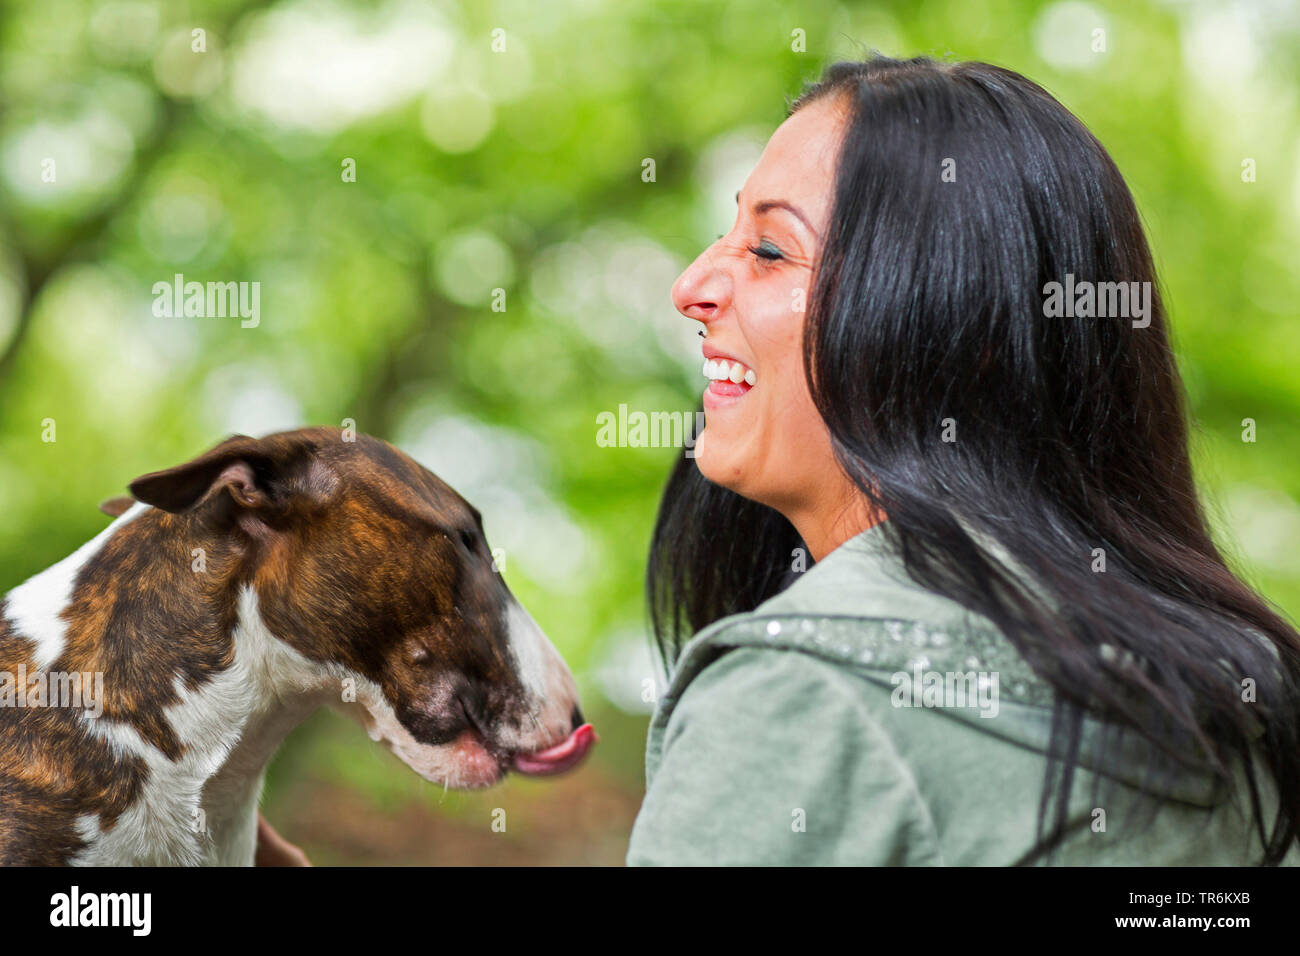 Bull Terrier (Canis lupus f. familiaris), woman stroking her dog, Germany Stock Photo